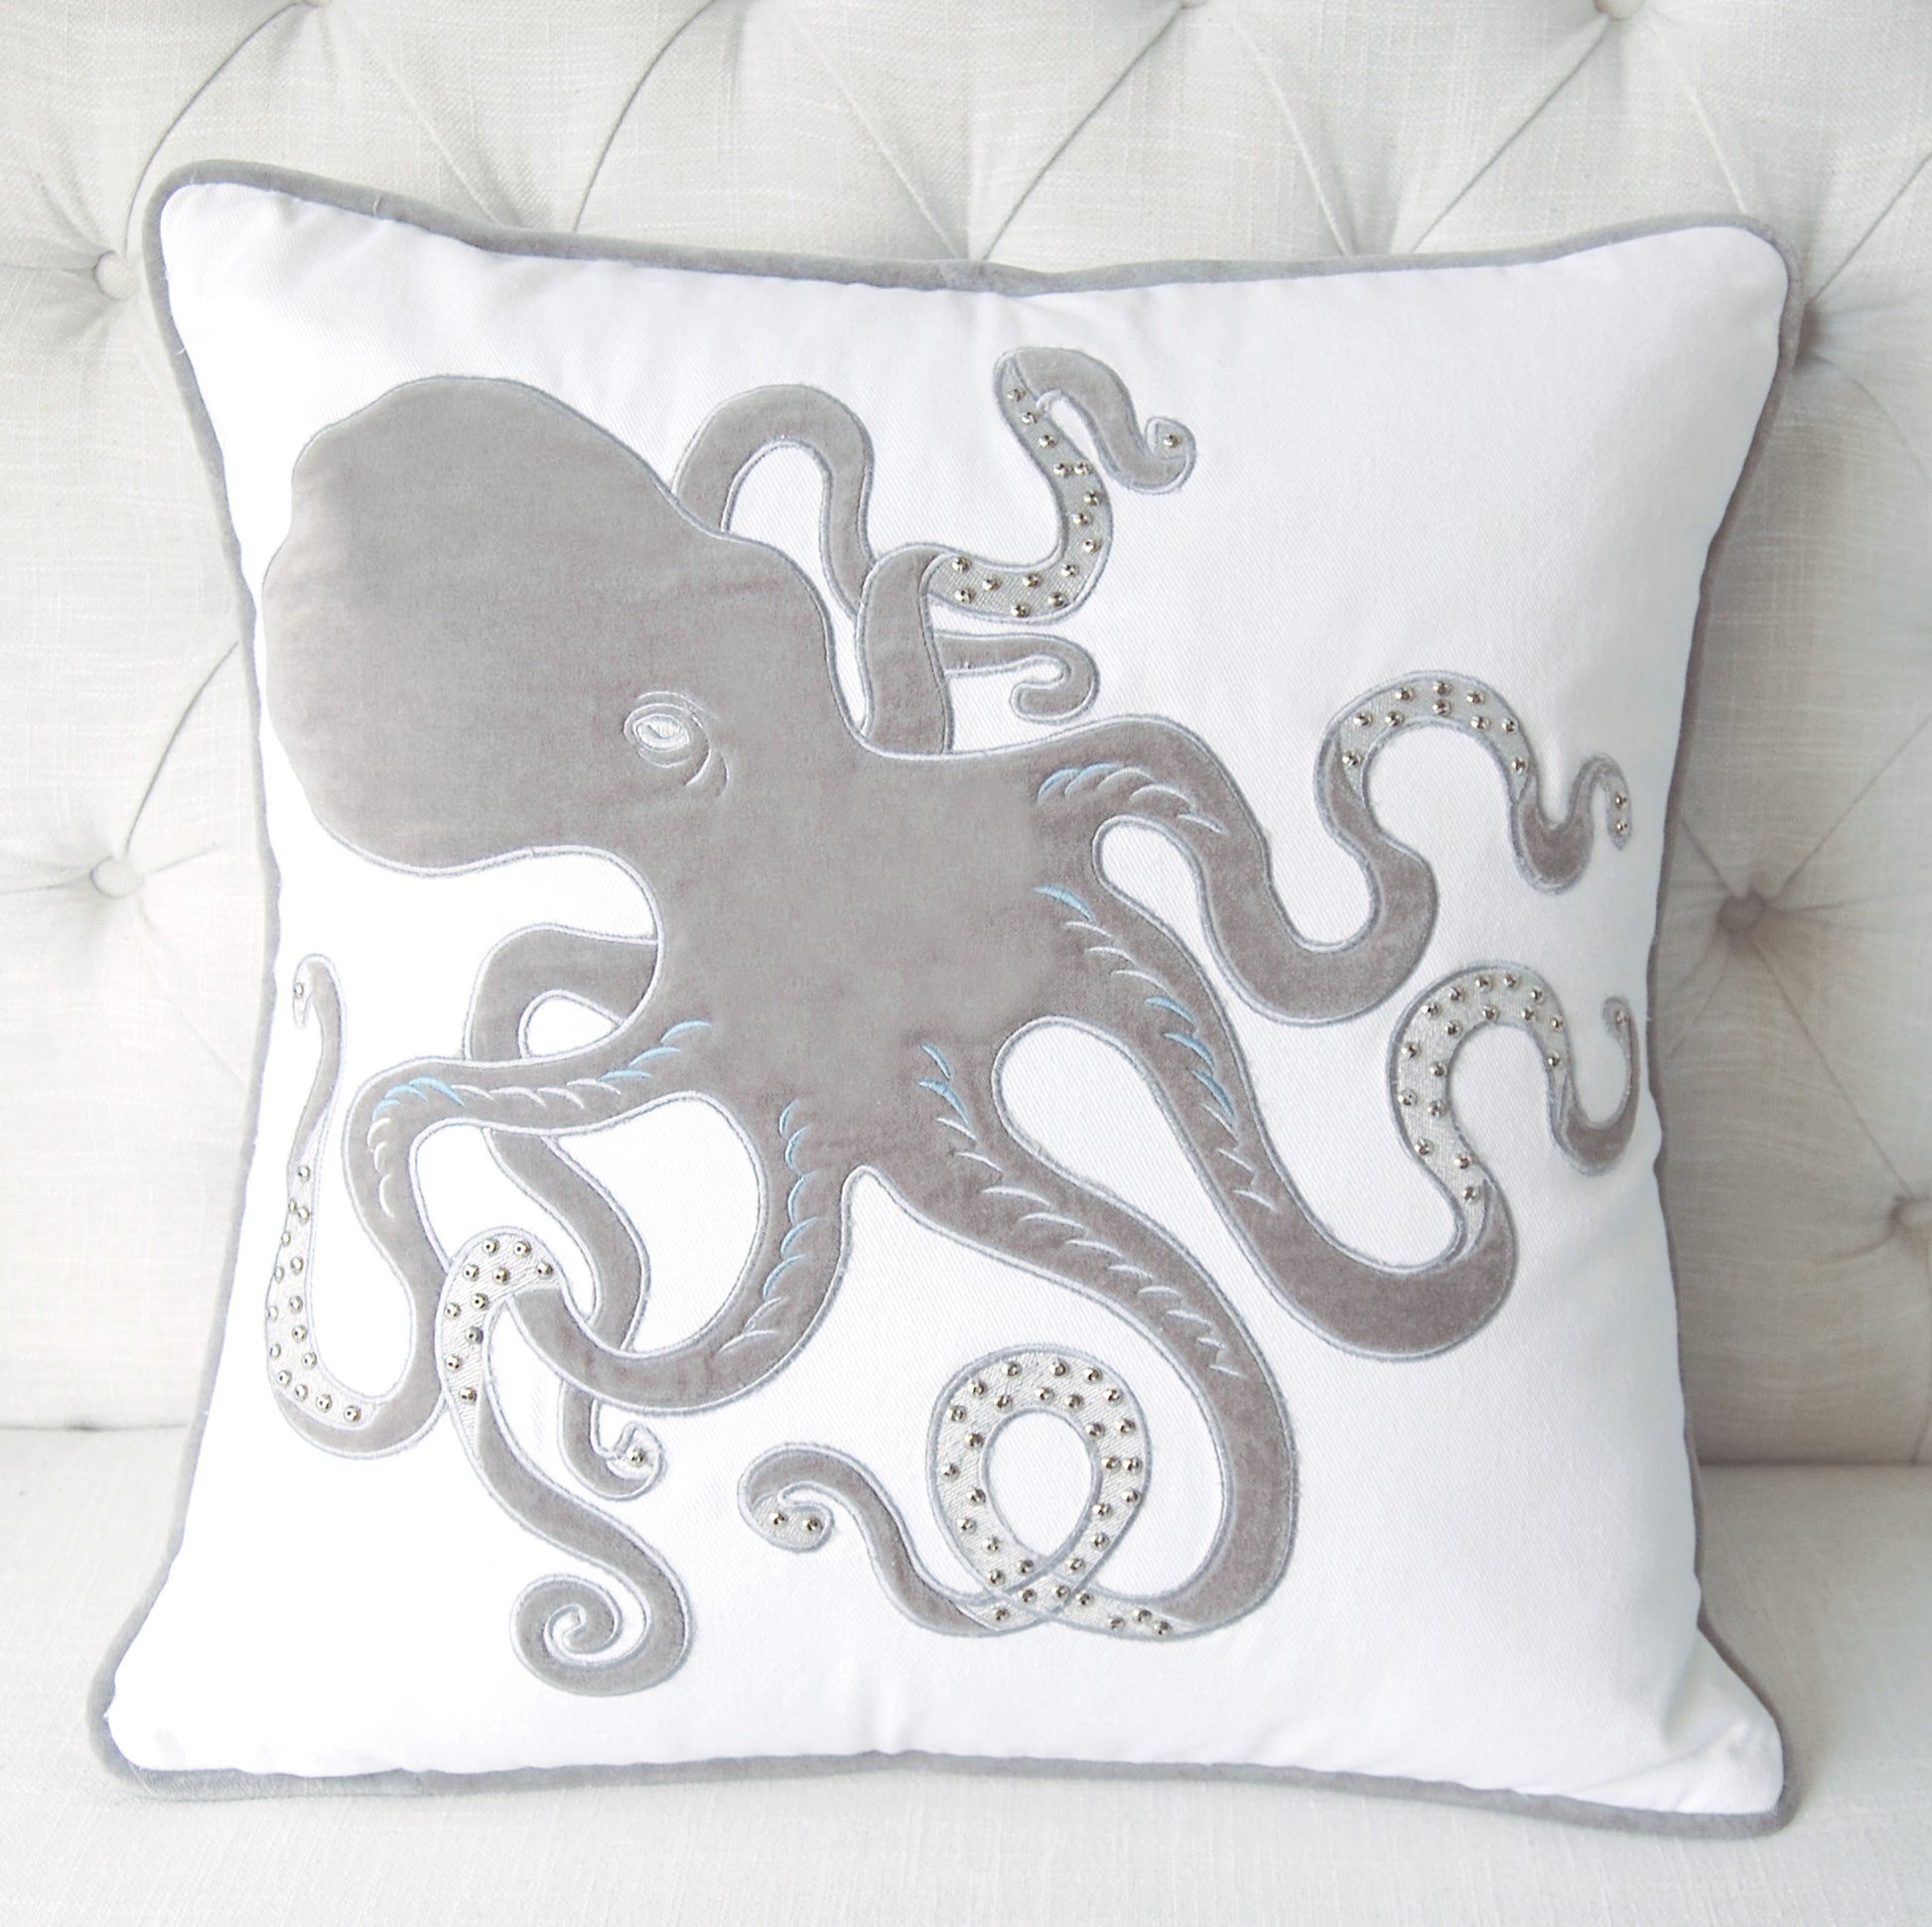 Grey Inkling Octopus pillow styled on a tufted couch.